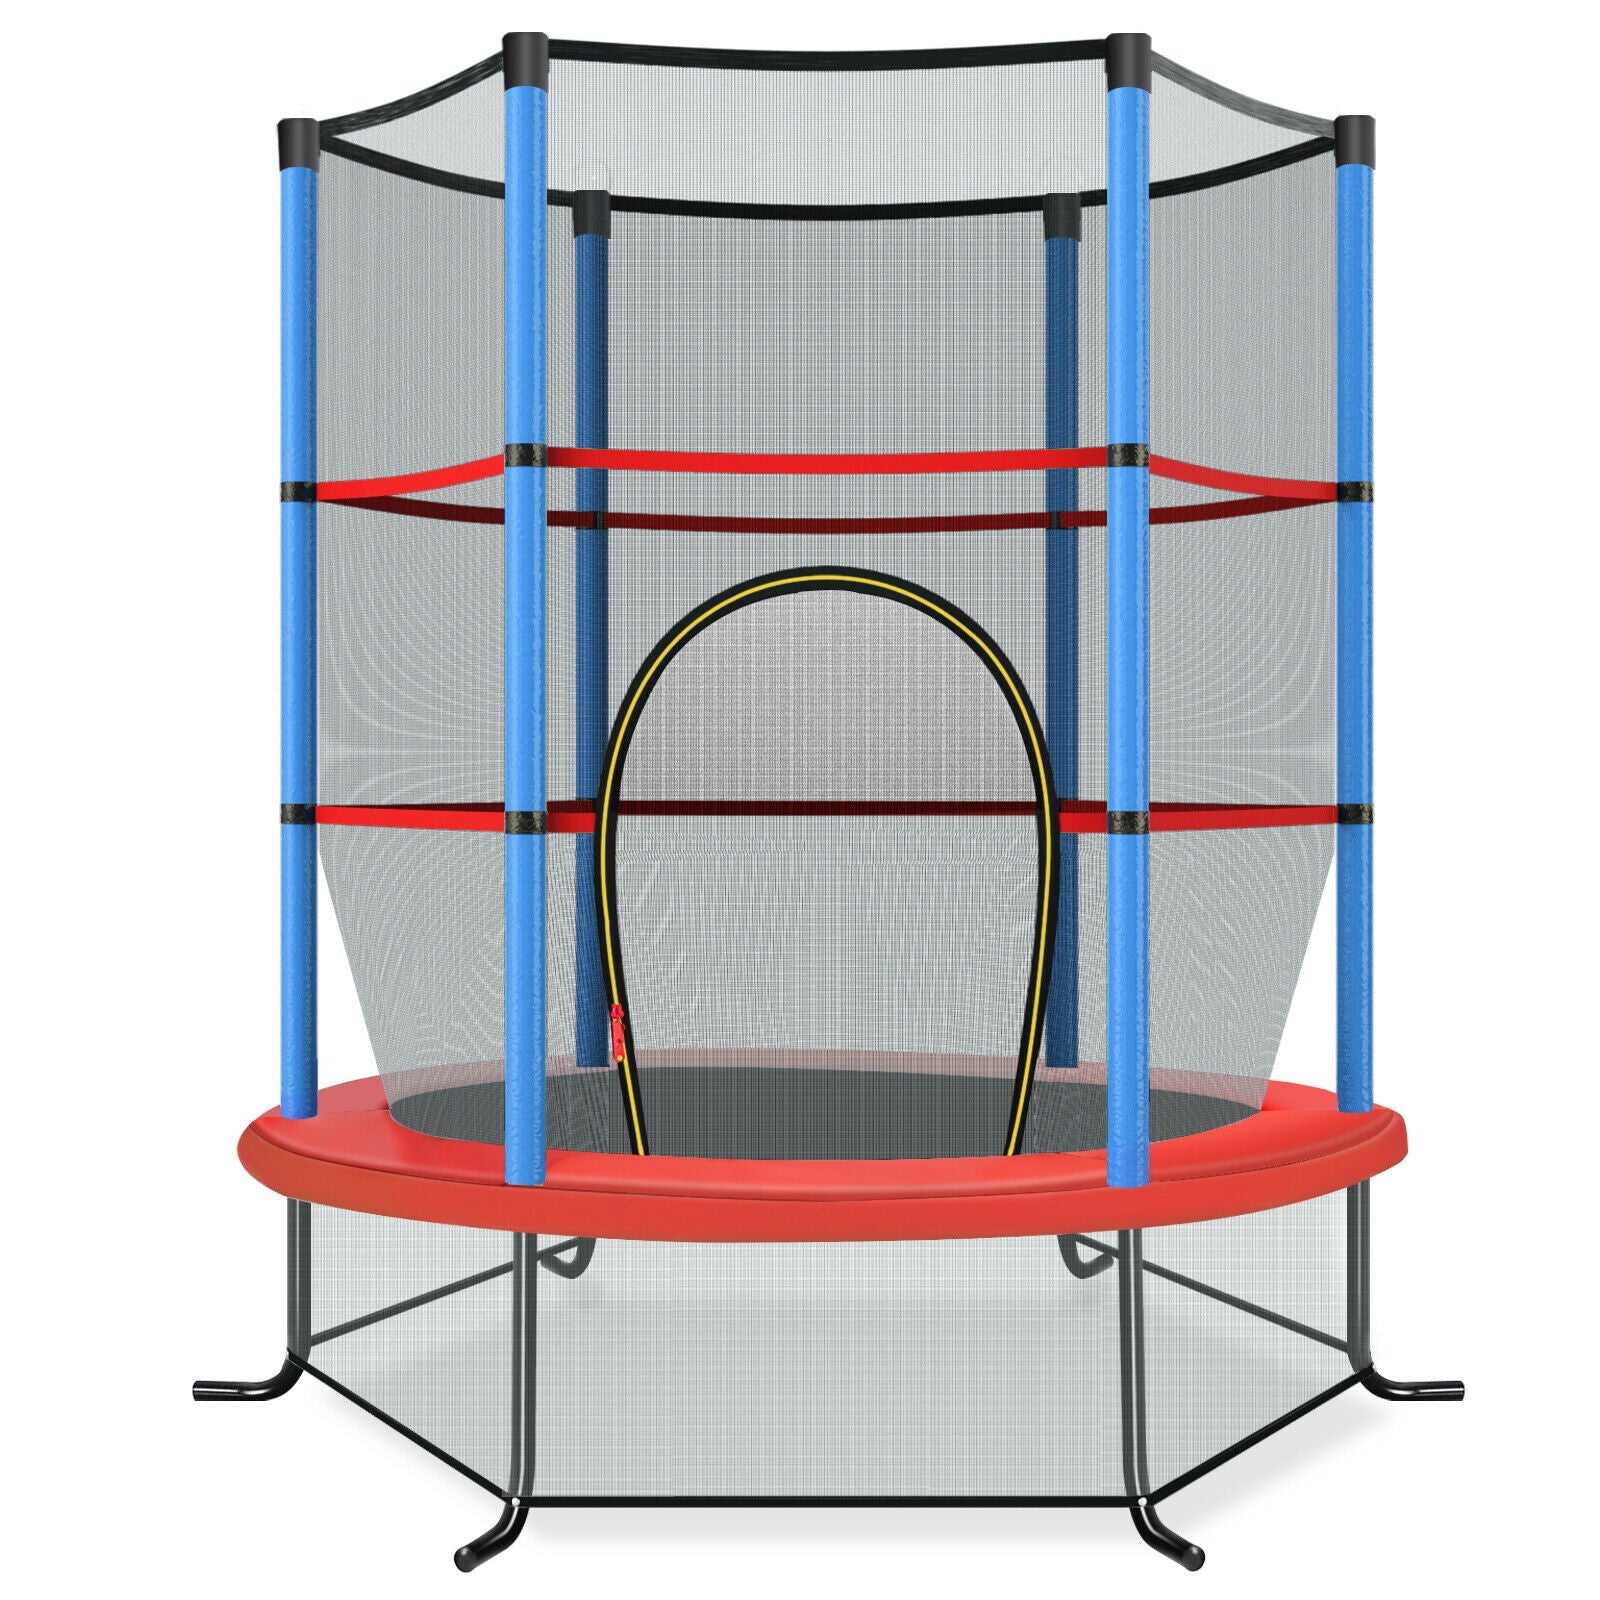 Playful Fun: Blue Mini Trampoline with Enclosure Net for Active Kids